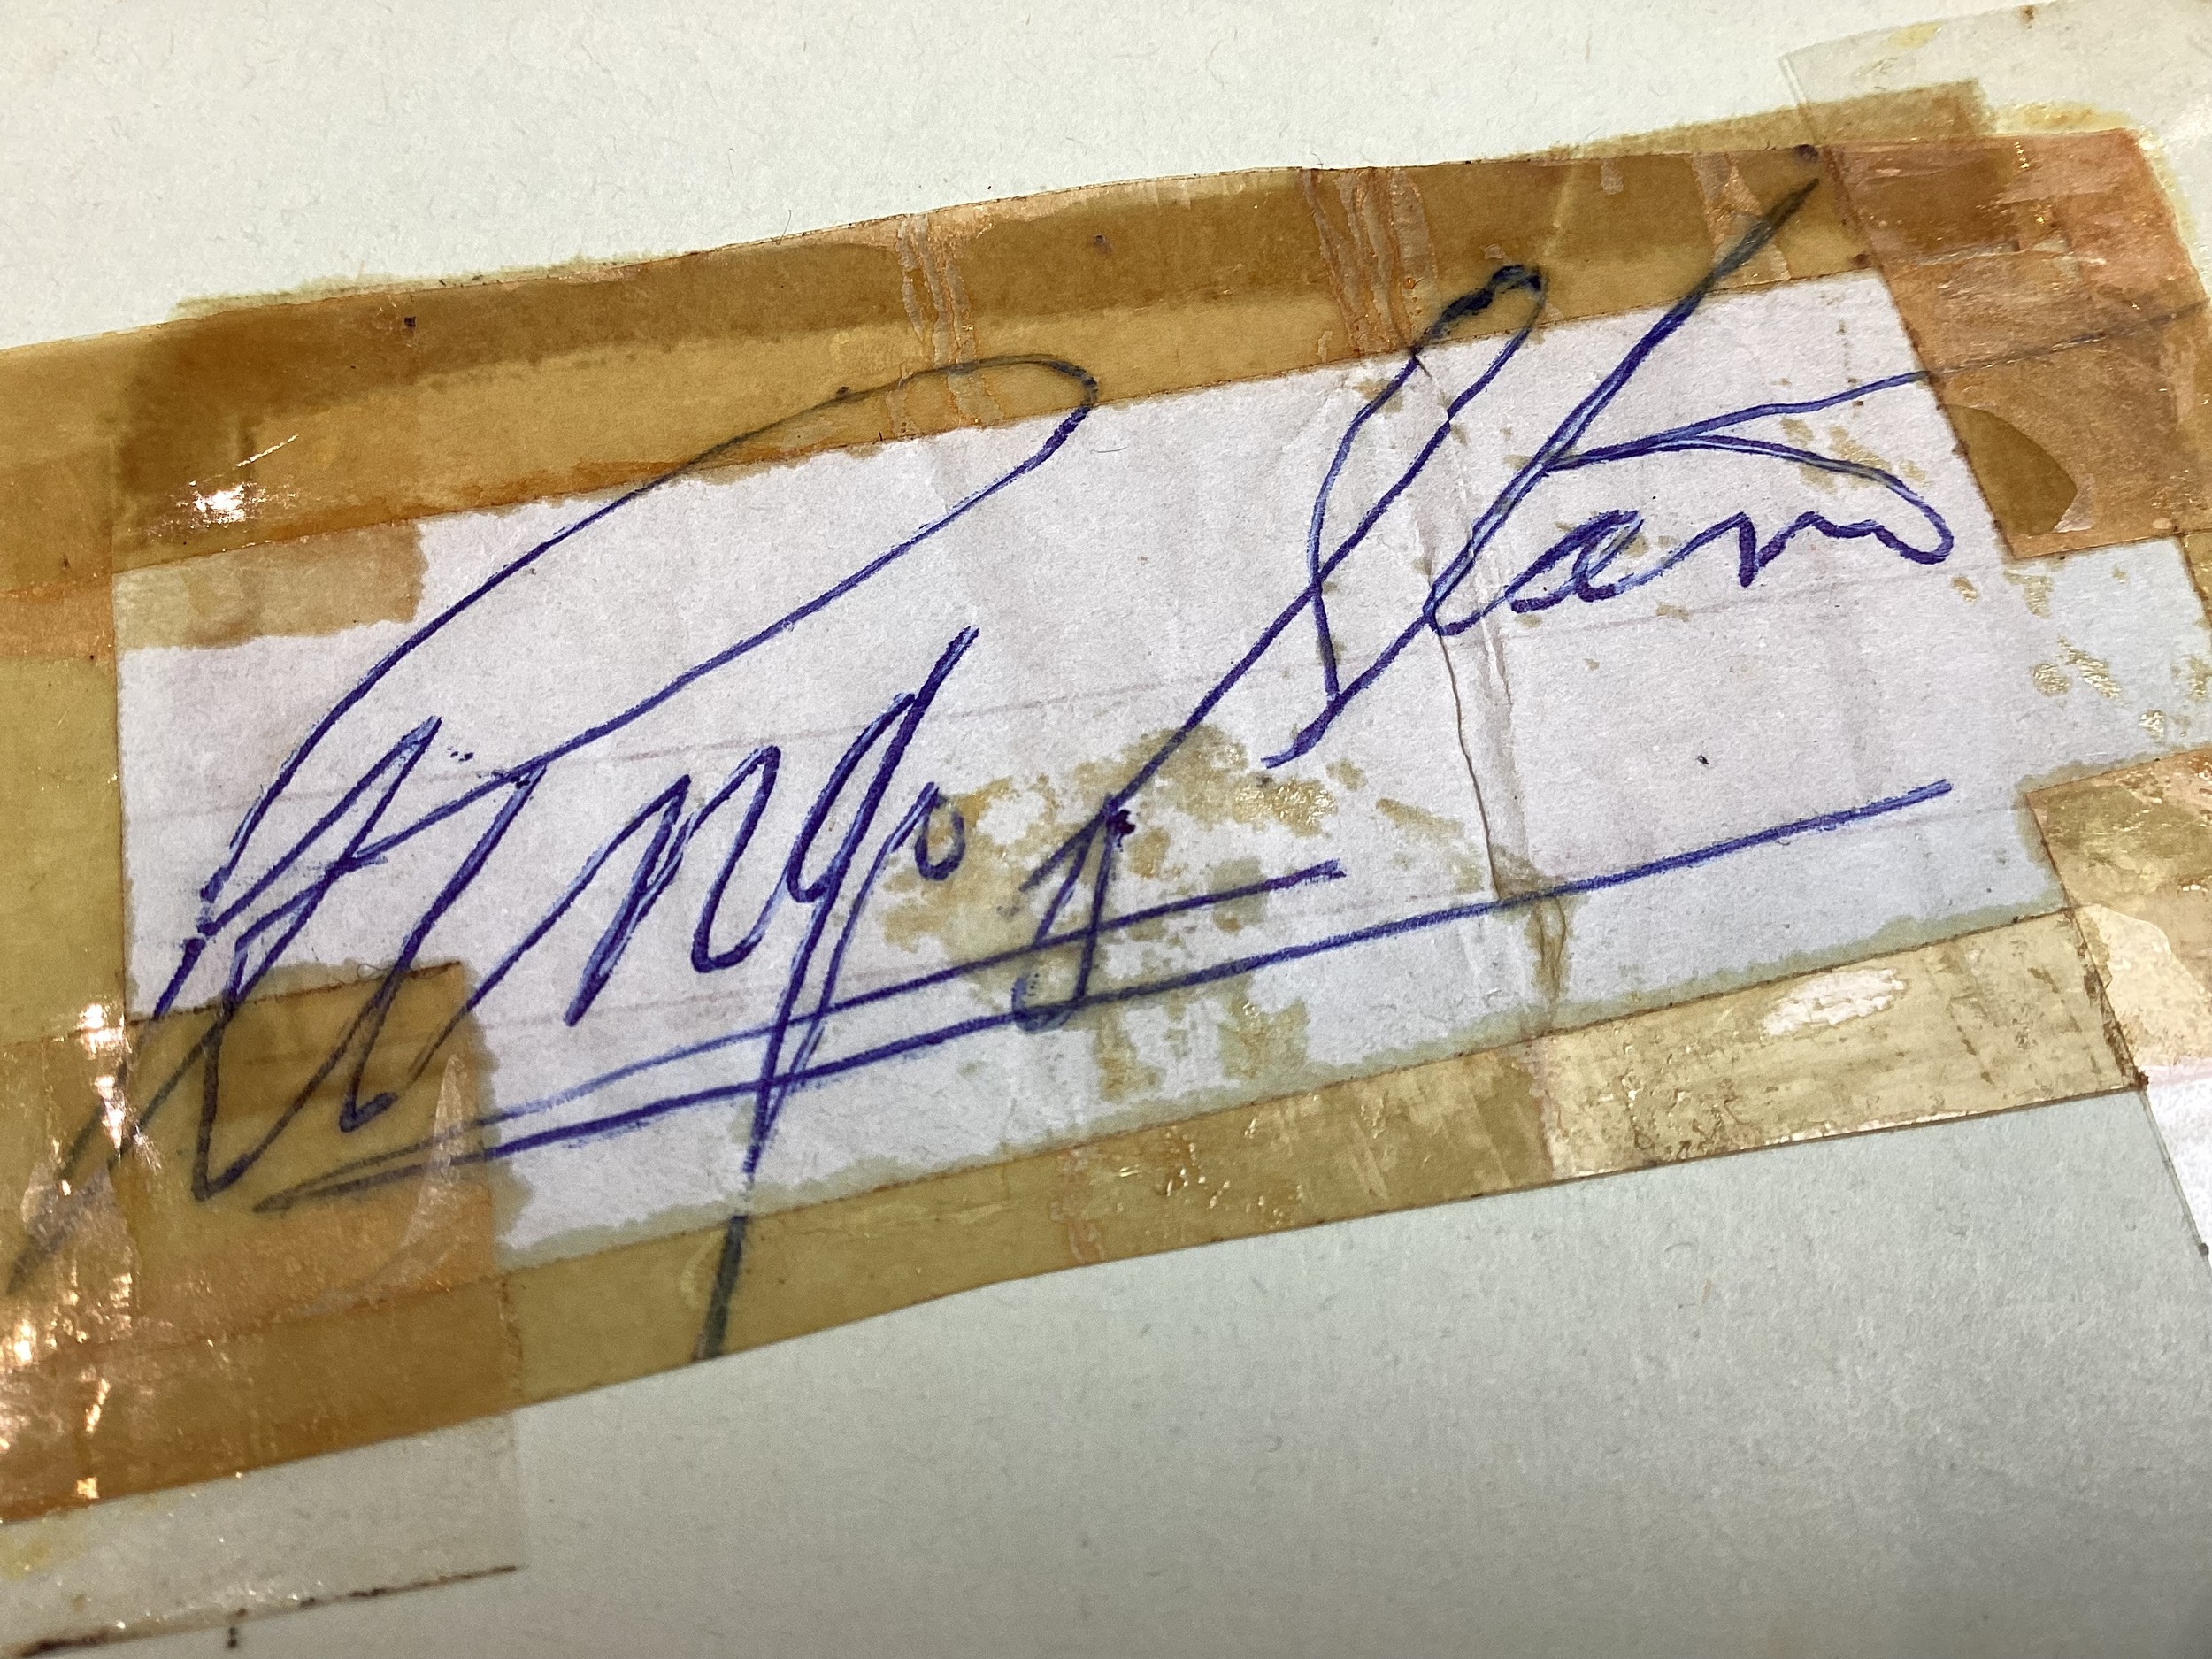 GENUINE 1960’S AUTOGRAPH BOOK CONTAINING VARIOUS POP / ROCK STARS. The book has seen better days - Image 7 of 14